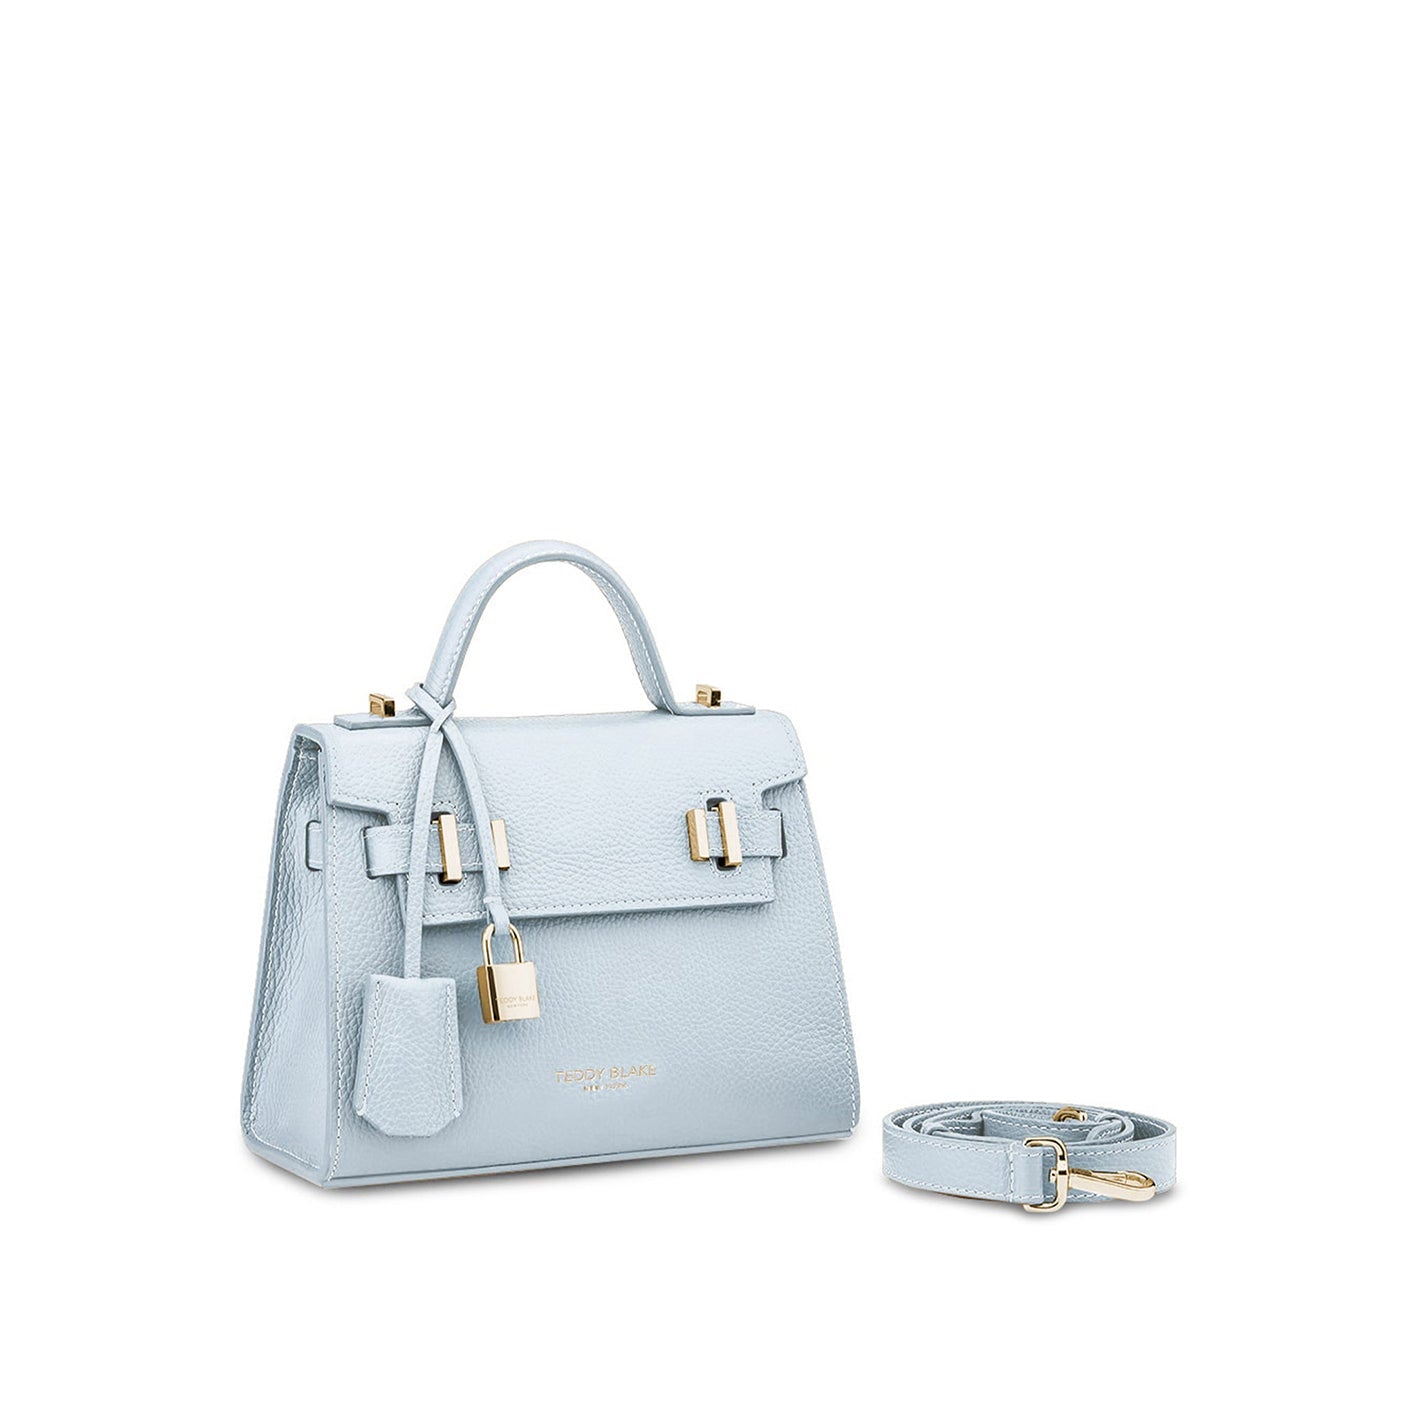 ava-gold-9-light-blue-leather-bag-with-handle